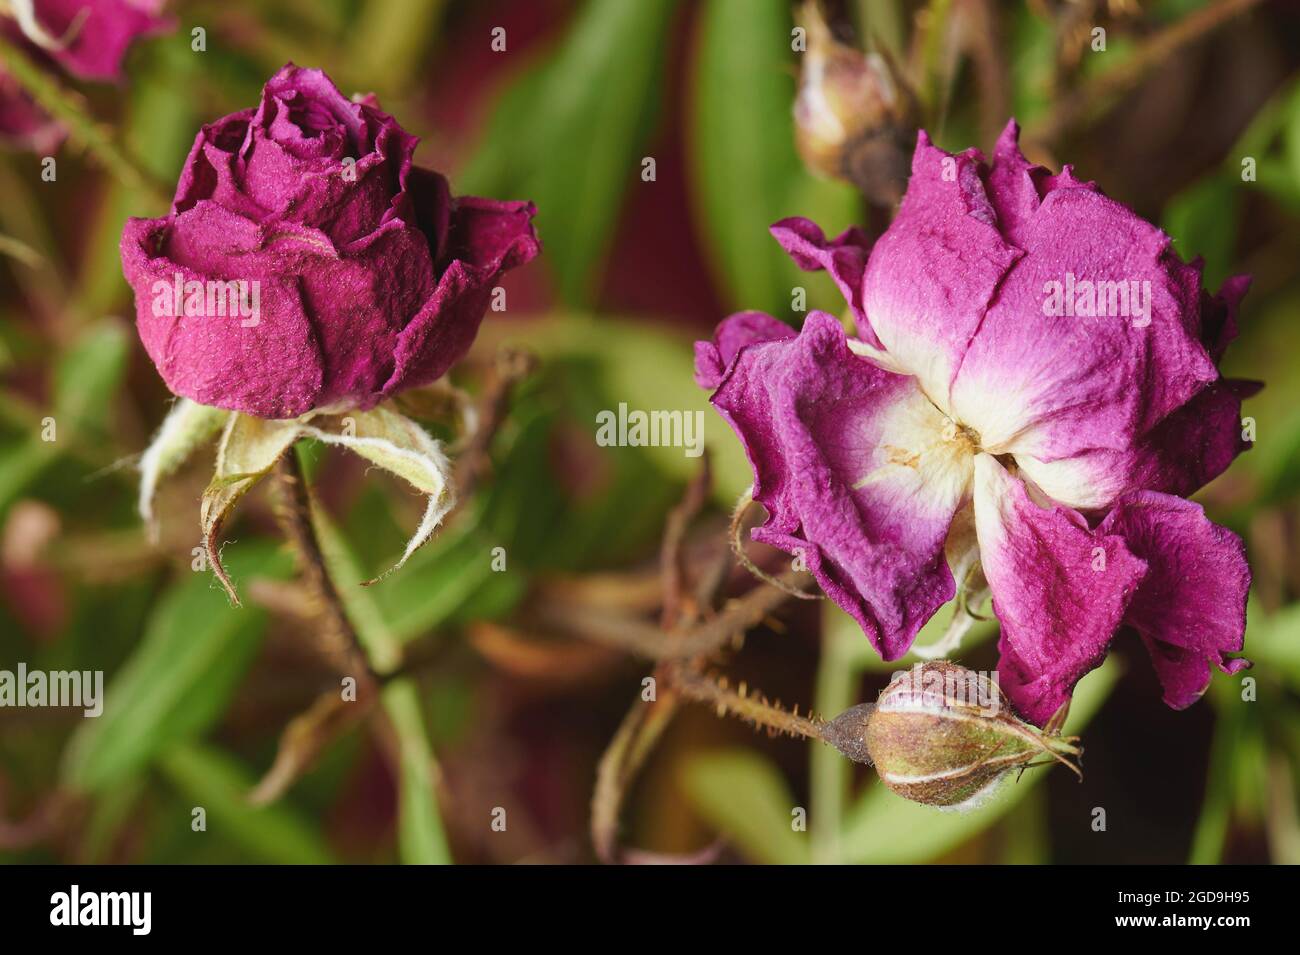 Purple dry rose flowers on blurred green background Stock Photo